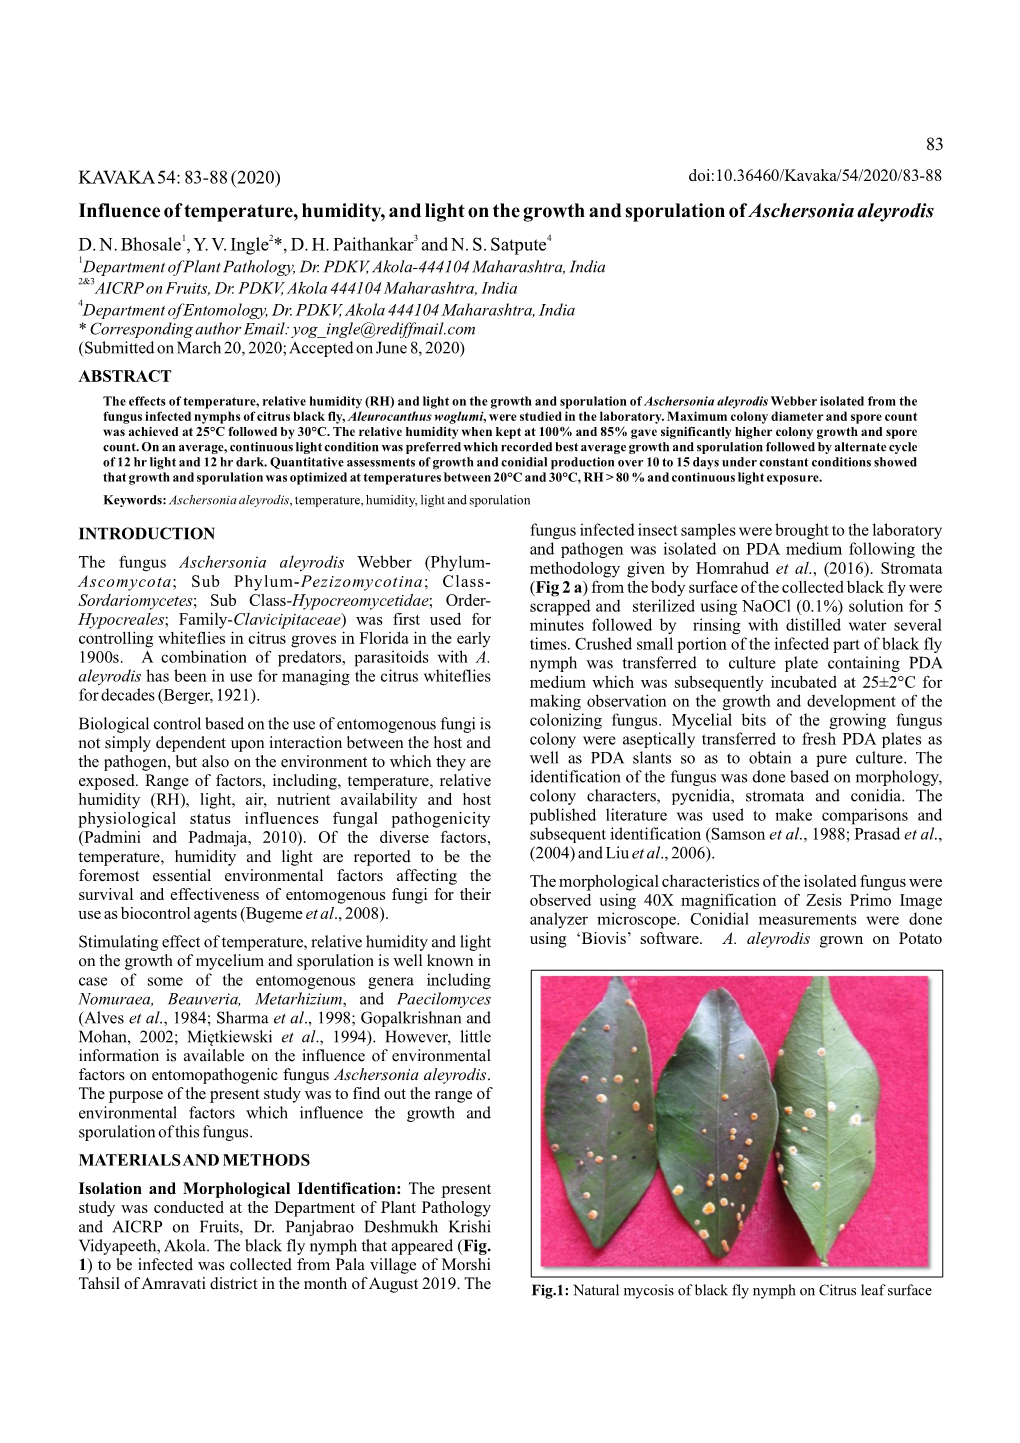 Influence of Temperature, Humidity, and Light on the Growth and Sporulation of Aschersonia Aleyrodis D